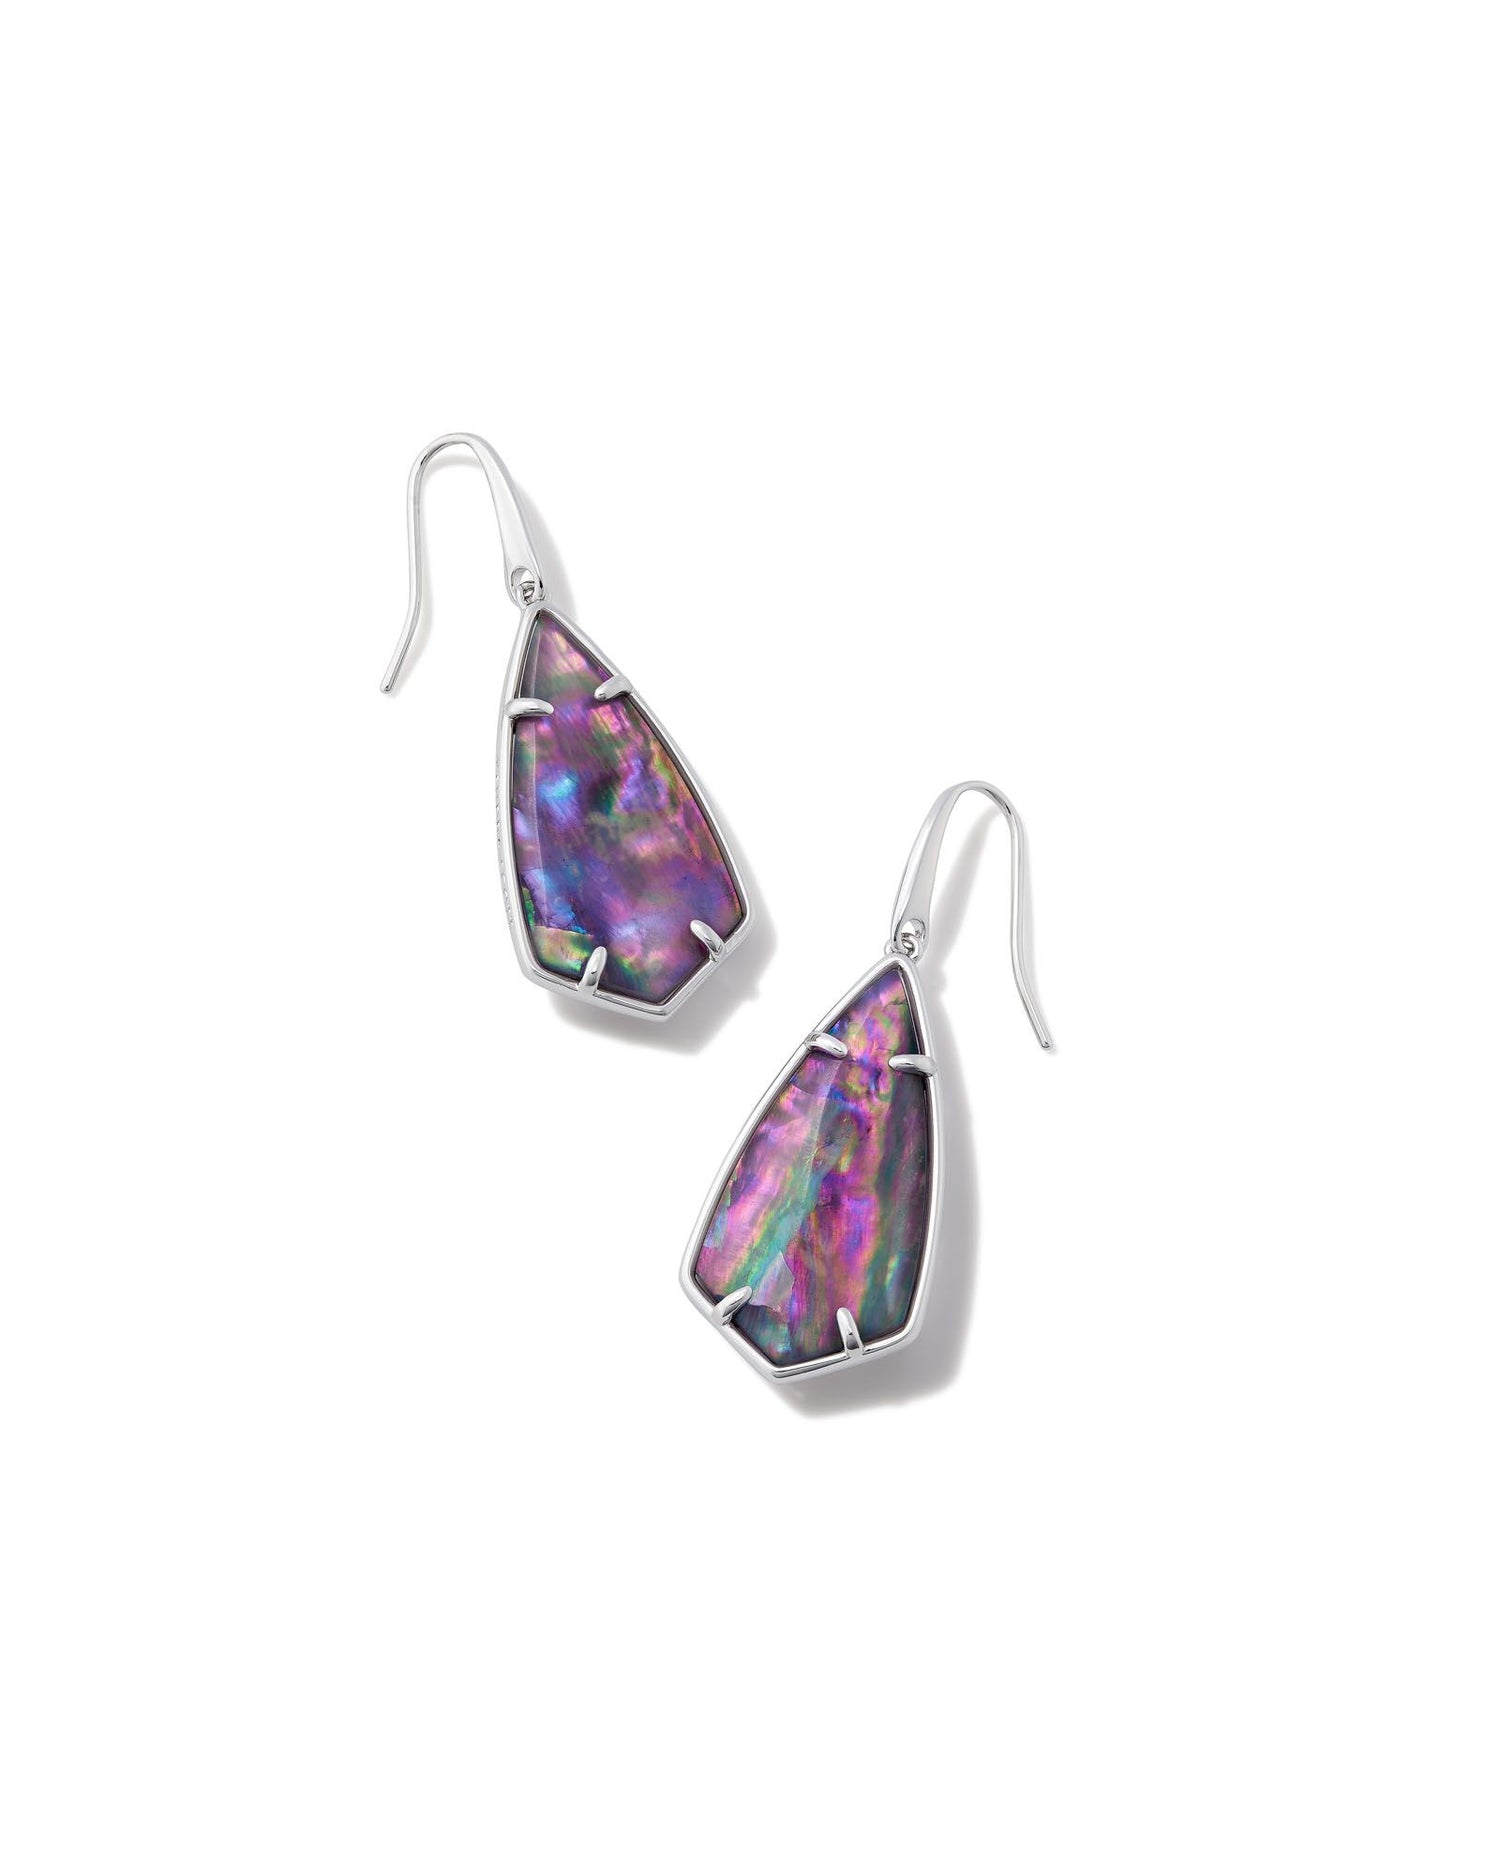 With their elongated, face-framing silhouette, the Camry Gold Drop Earrings look good on everyone. Featuring our archival Camry stone shape with a sleek new metal frame, these earrings add the finishing touch to any outfit. This metal is 24k rhodium plated over brass with purple abalone colored stones. 